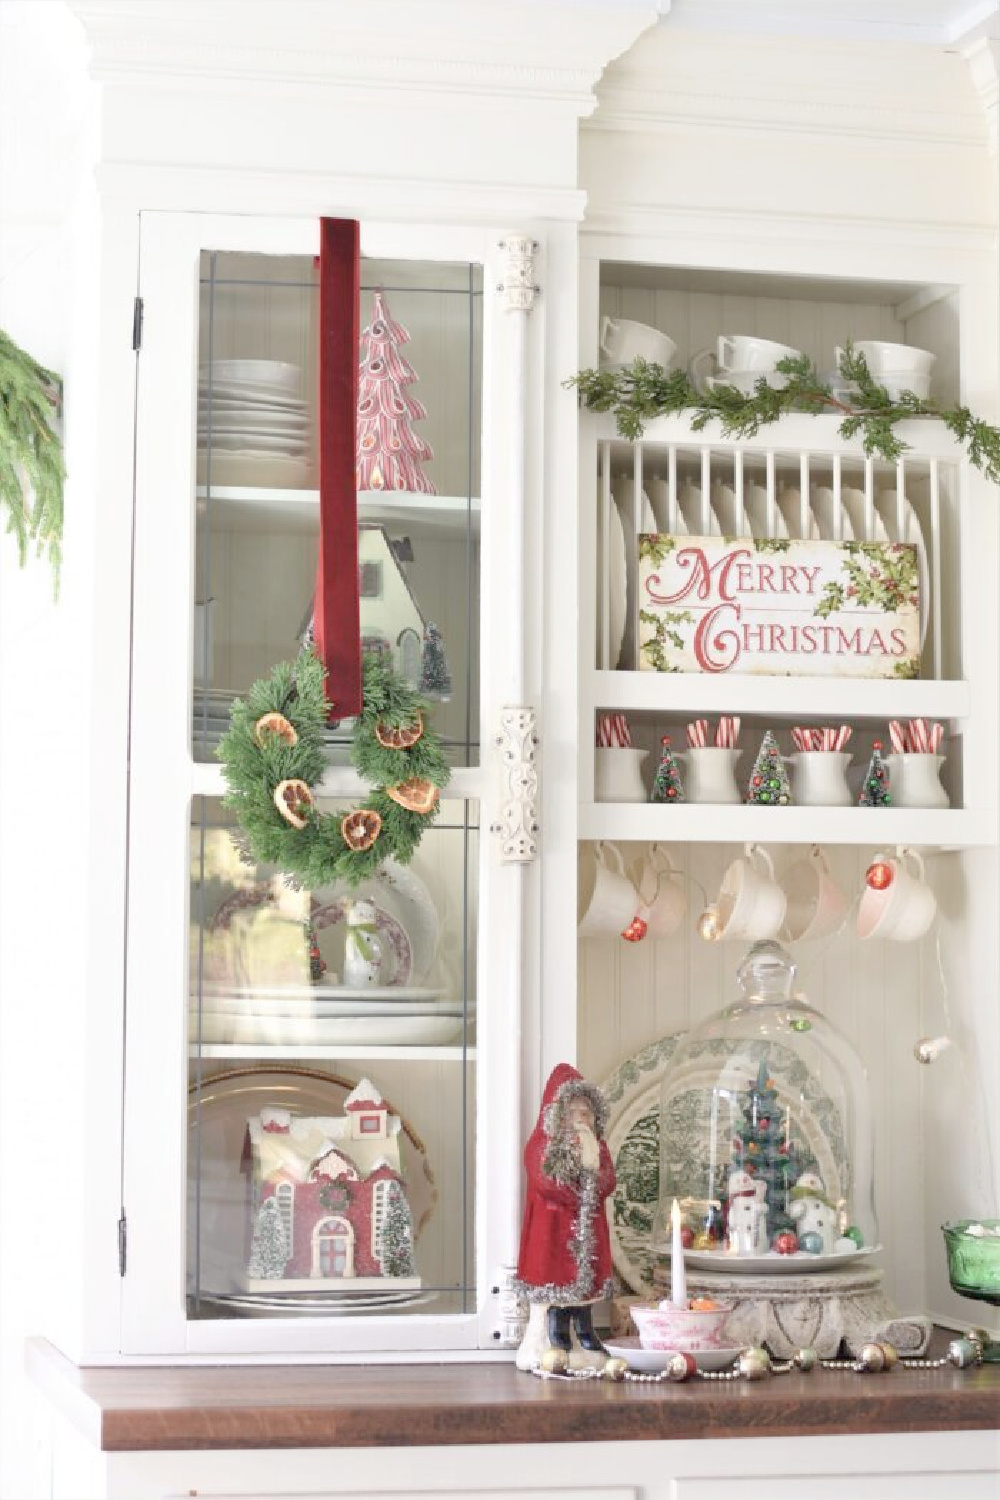 Christmas farmhouse kitchen with white cupboards and wreath with citrus slices hanging from ribbon on glass door - Follow the Yellow Brick Home. #christmaskitchen #countrychristmas #christmascitruswreath